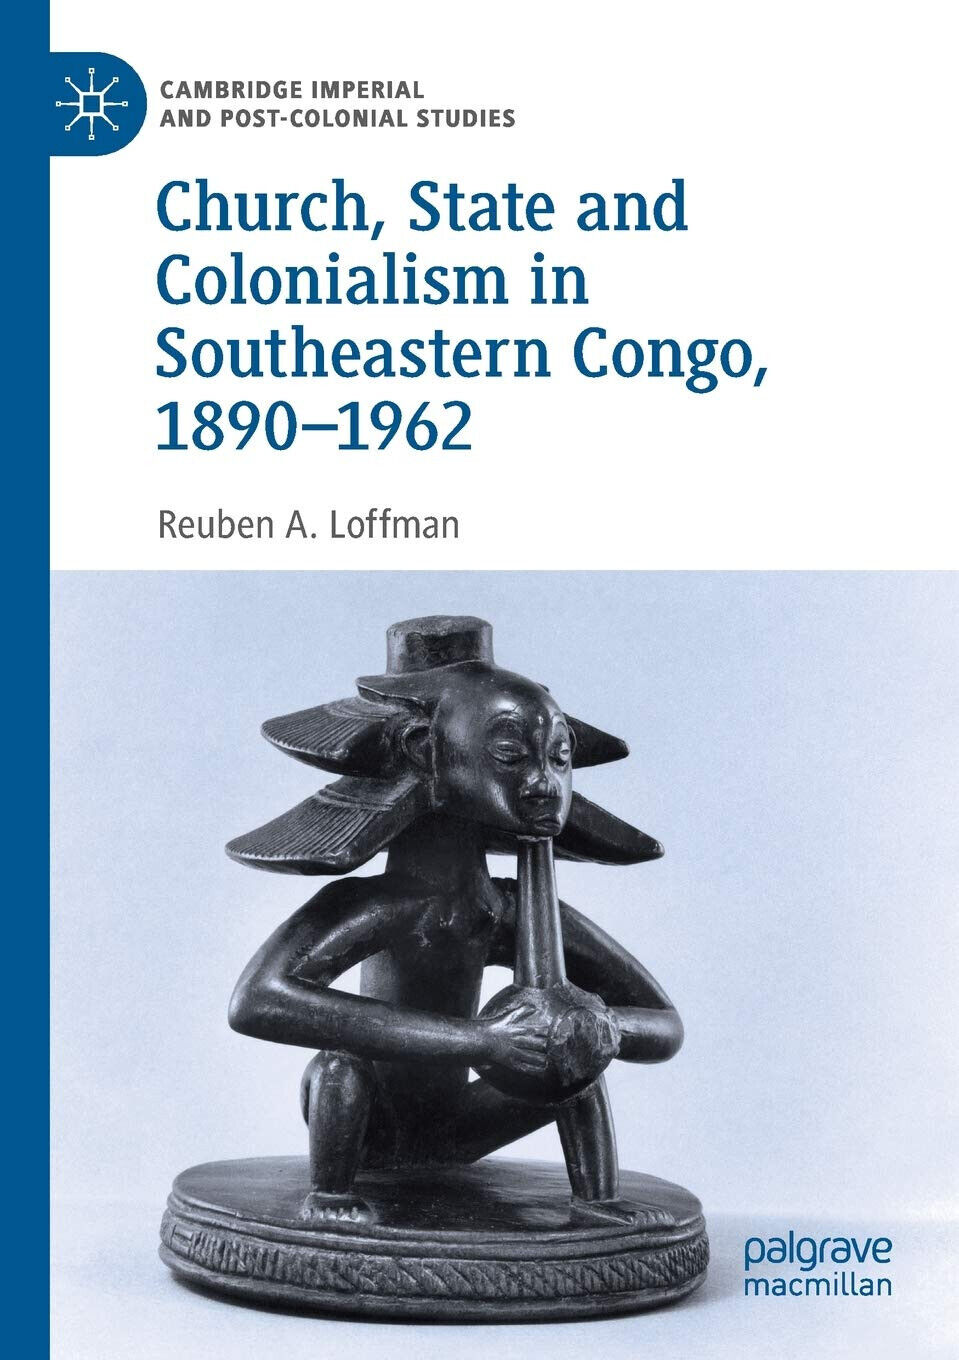 Church, State and Colonialism in Southeastern Congo, 1890-1962 - Palgrave, 2020